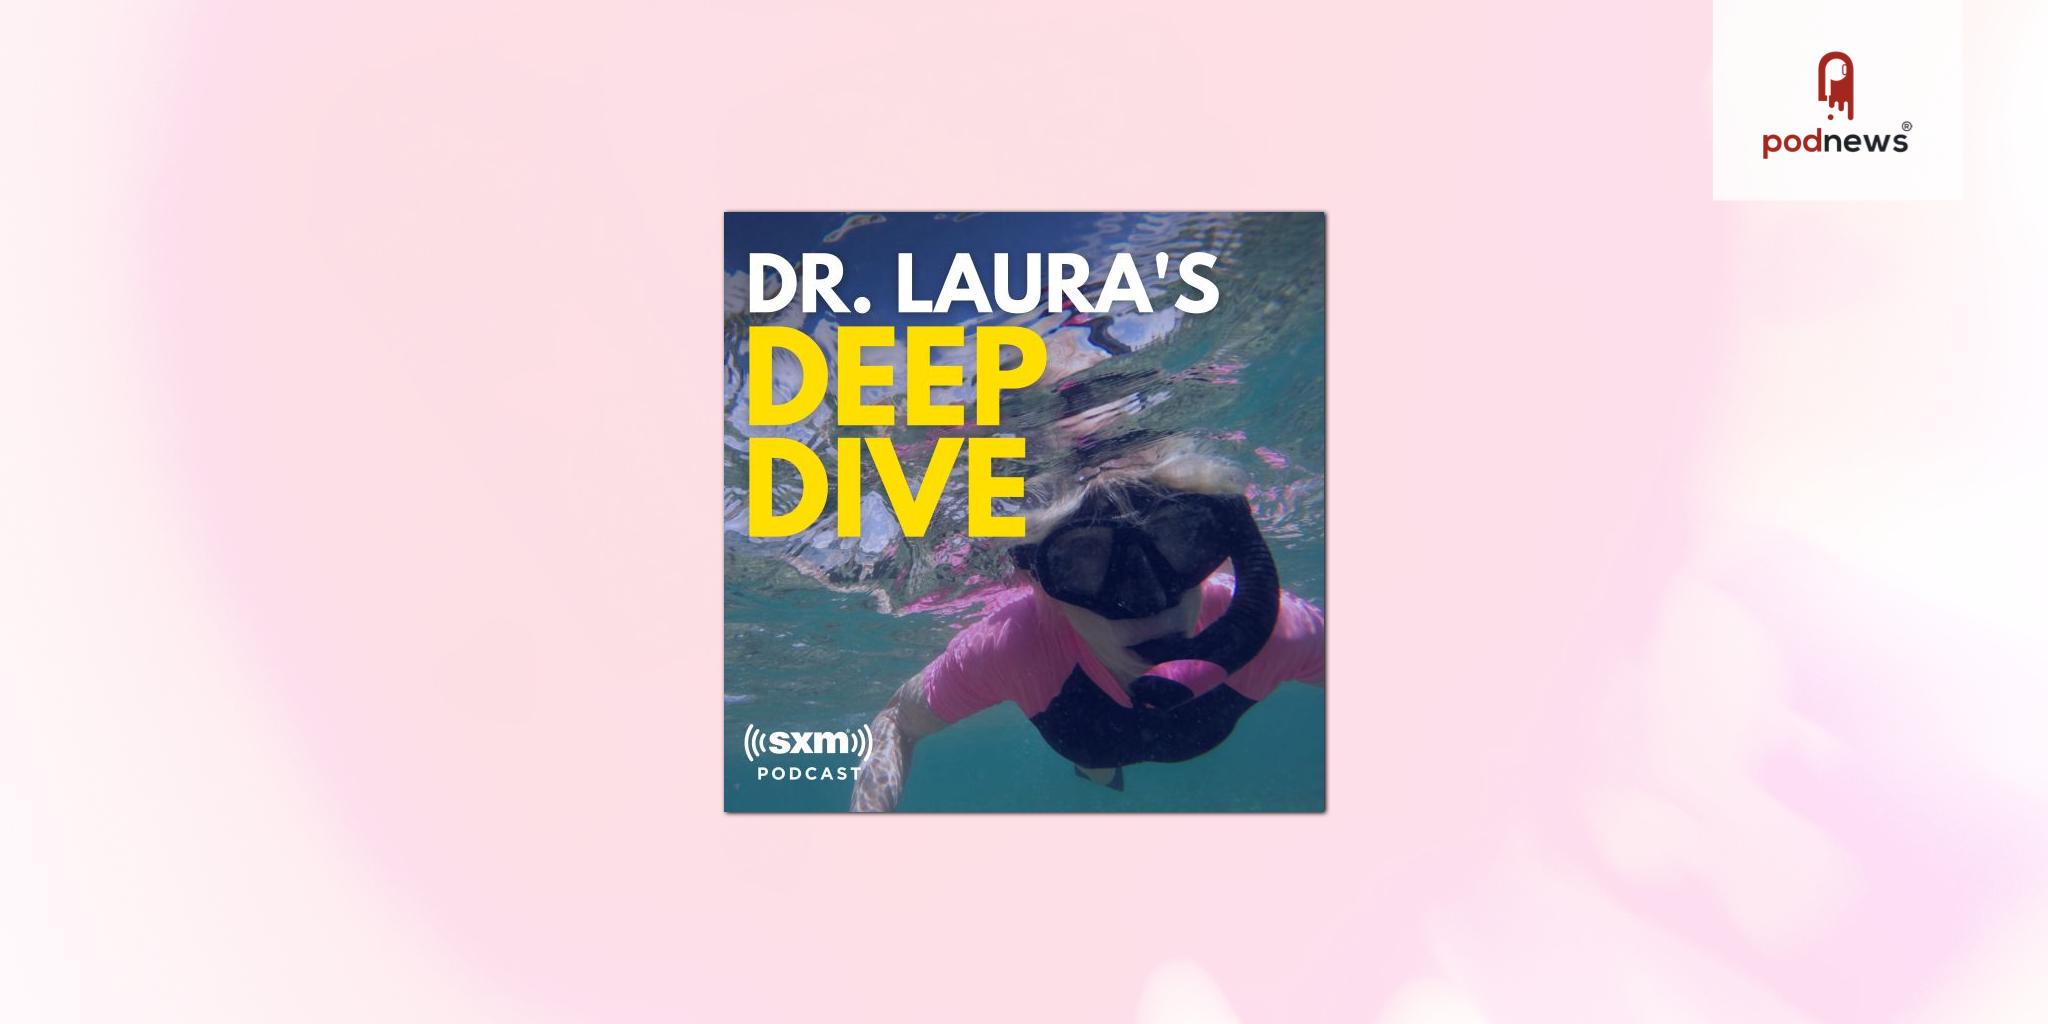  Dr. Laura Schlessinger launches a second podcast - Dr Laura's Deep Dive